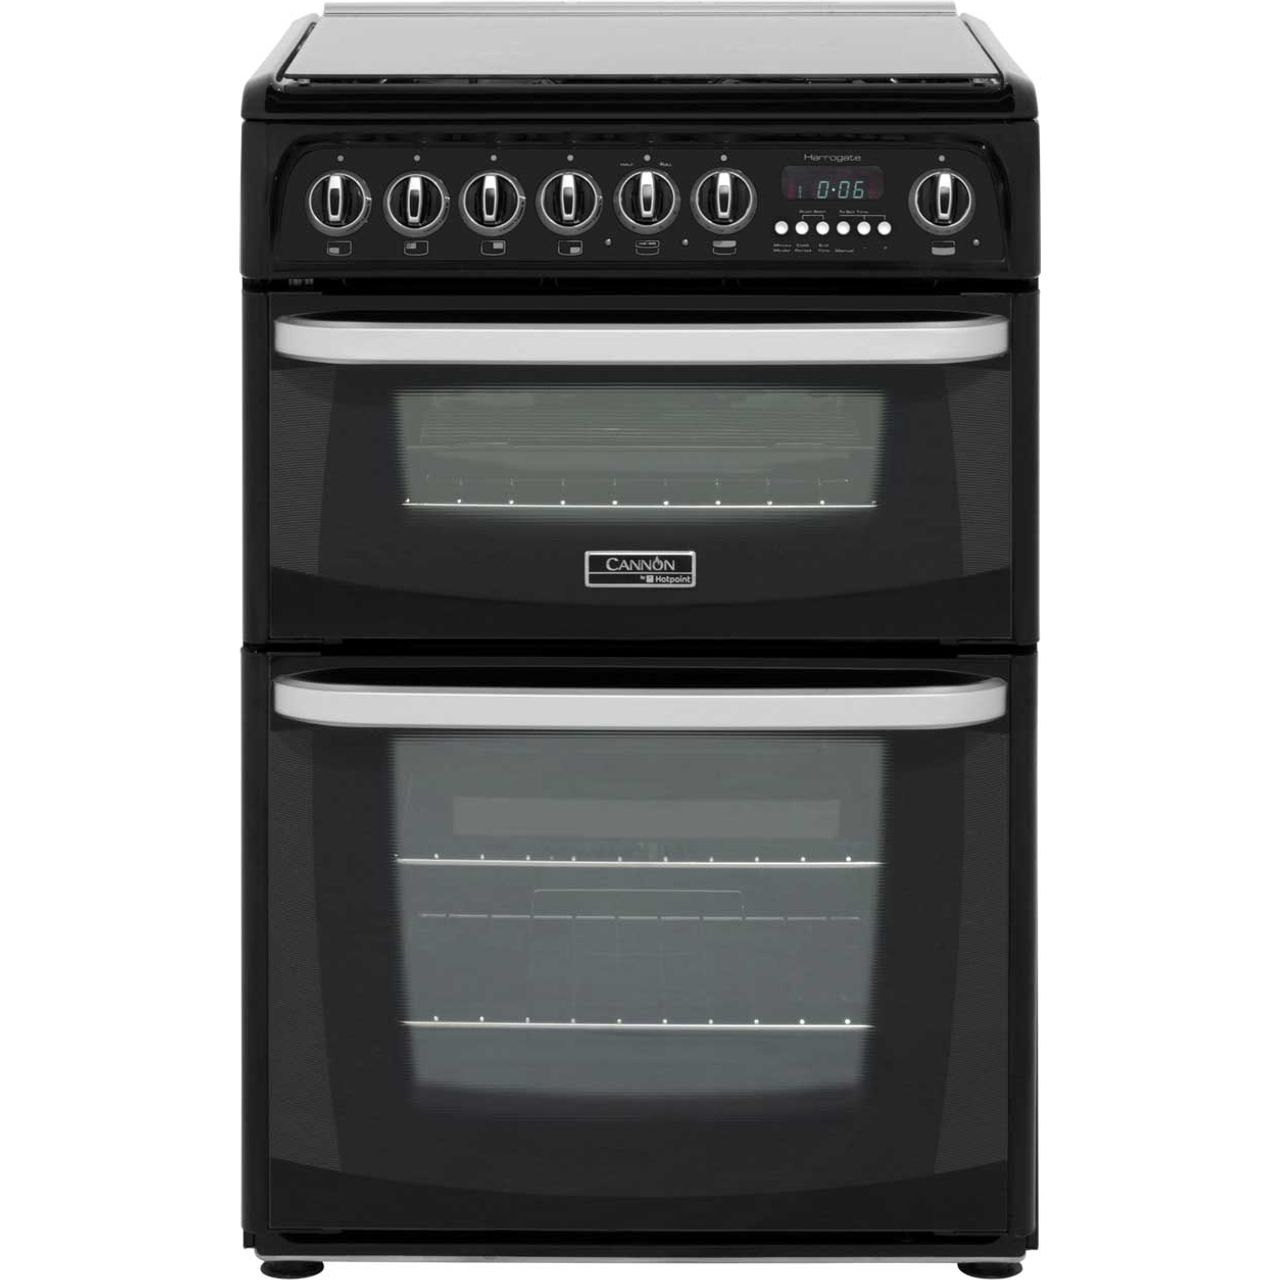 Cannon by Hotpoint Harrogate CH60DHKFS Dual Fuel Cooker Review